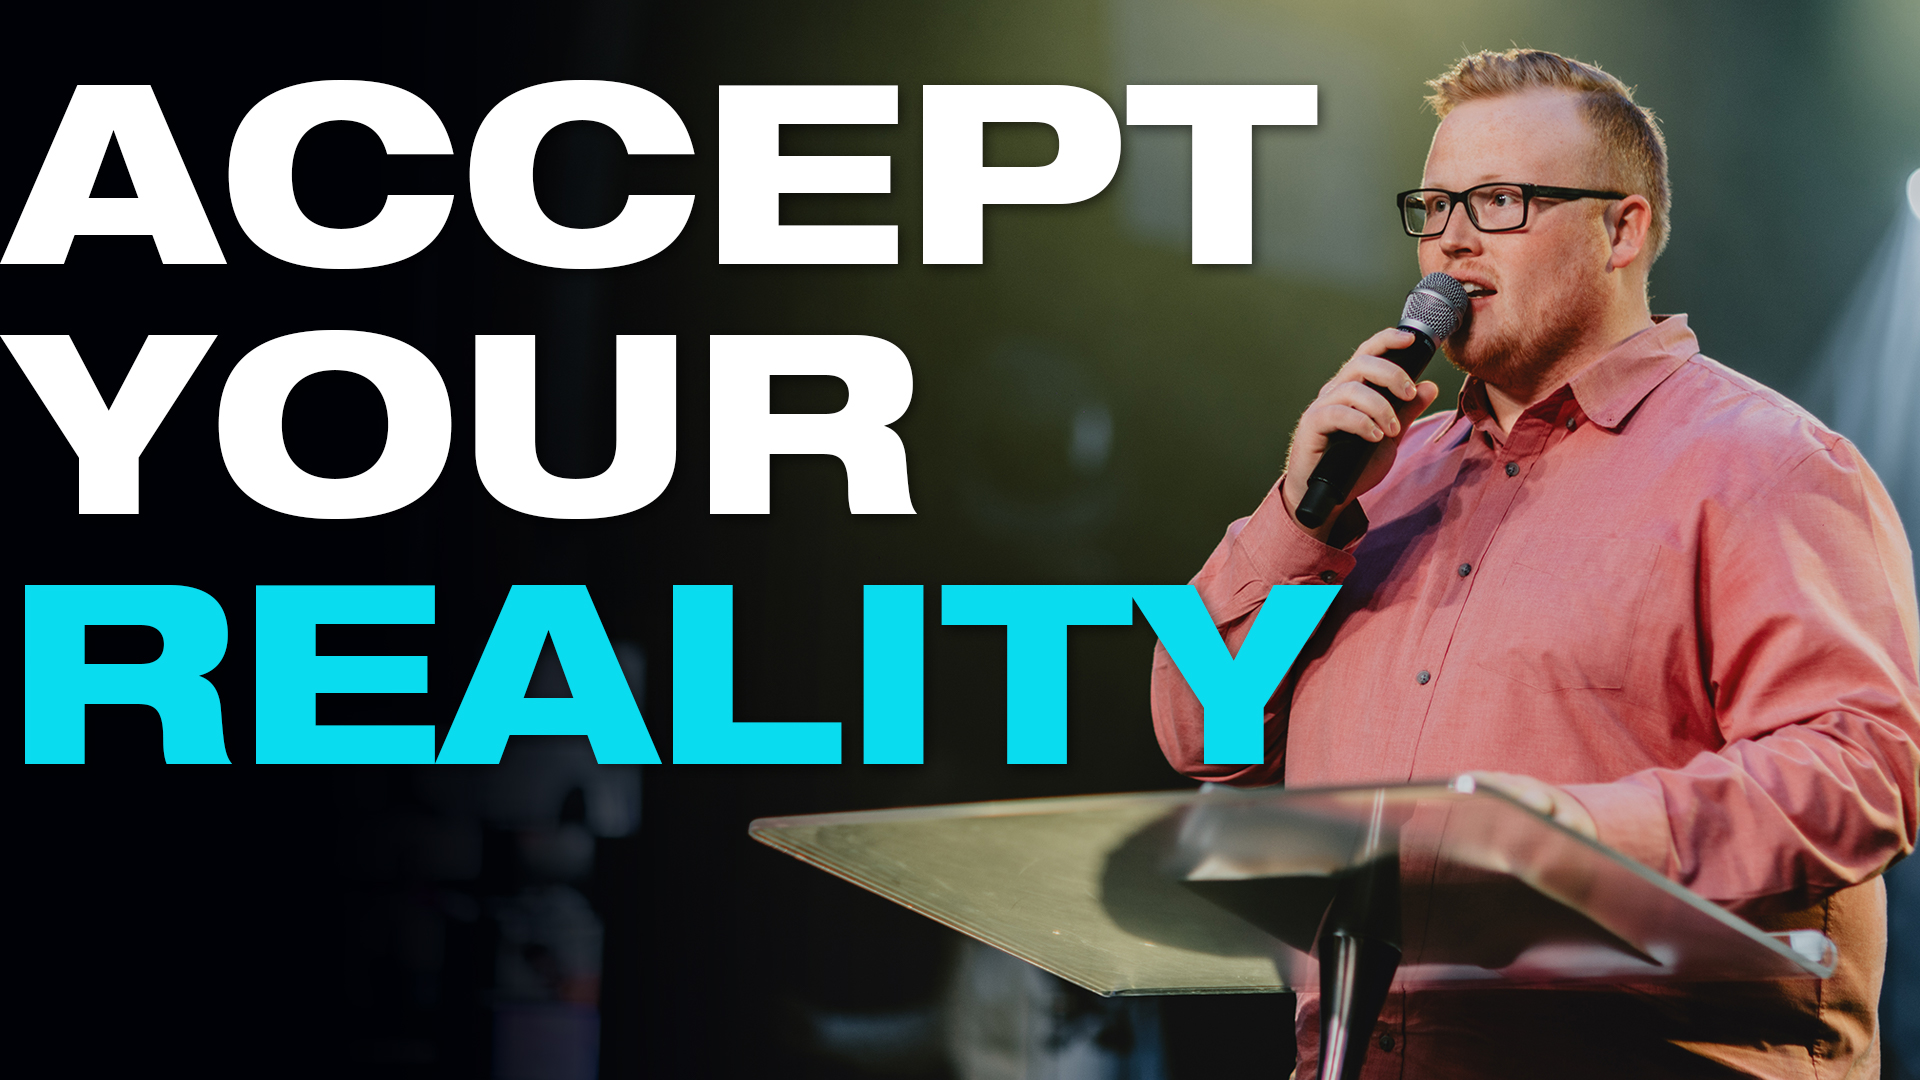 Featured image for “Accept Your Reality”